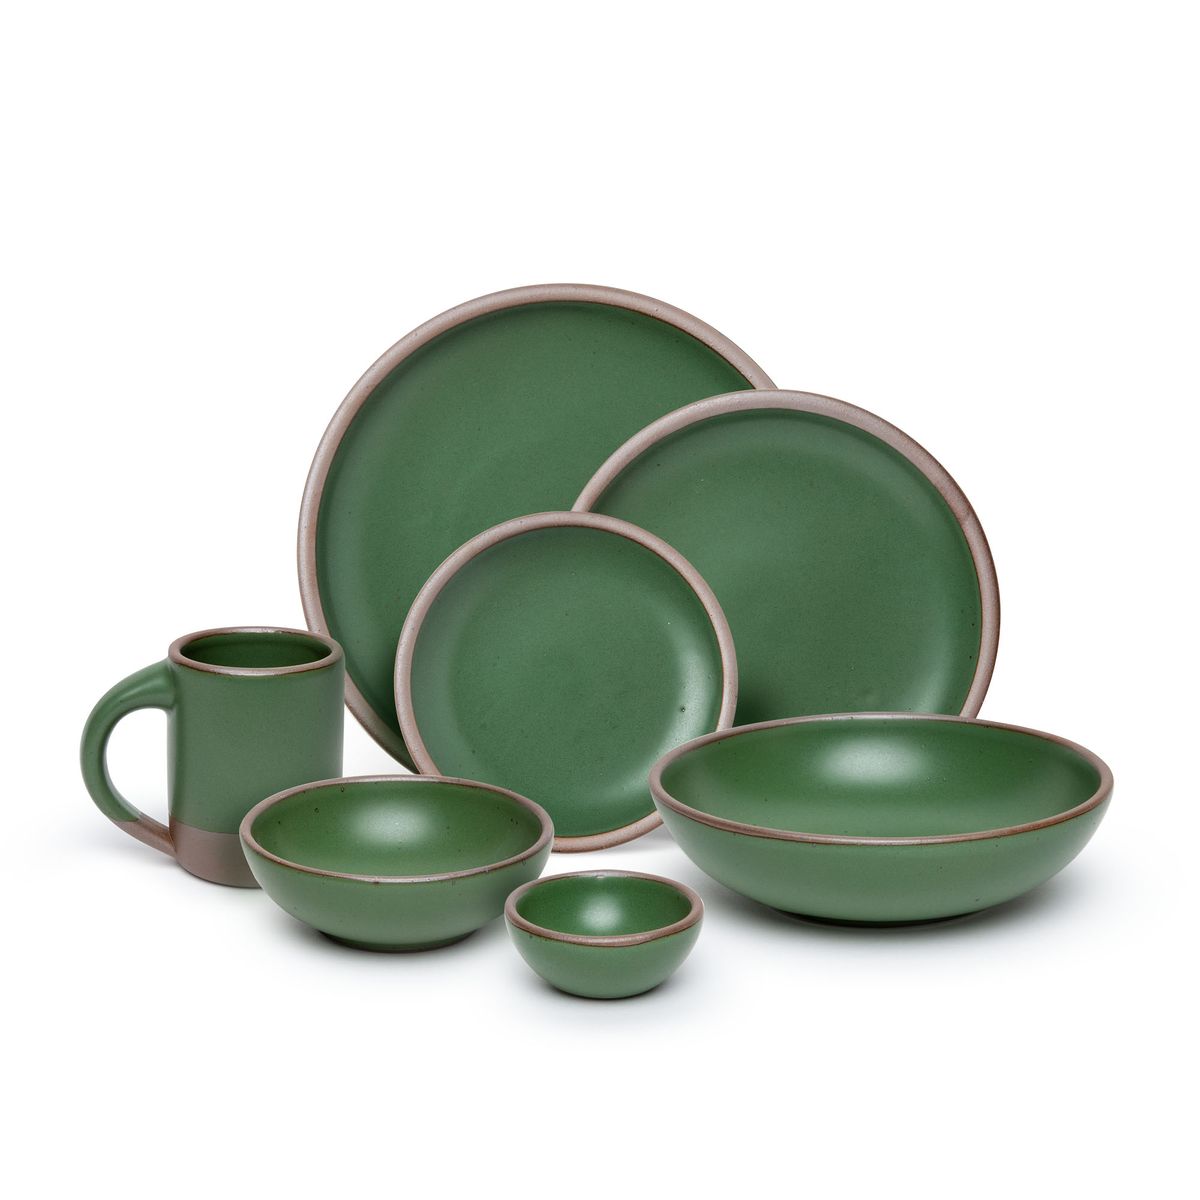 The Mug, bitty bowl, breakfast bowl, everyday bowl, cake plate, side plate and dinner plate paired together in a deep, verdant green color featuring iron speckles